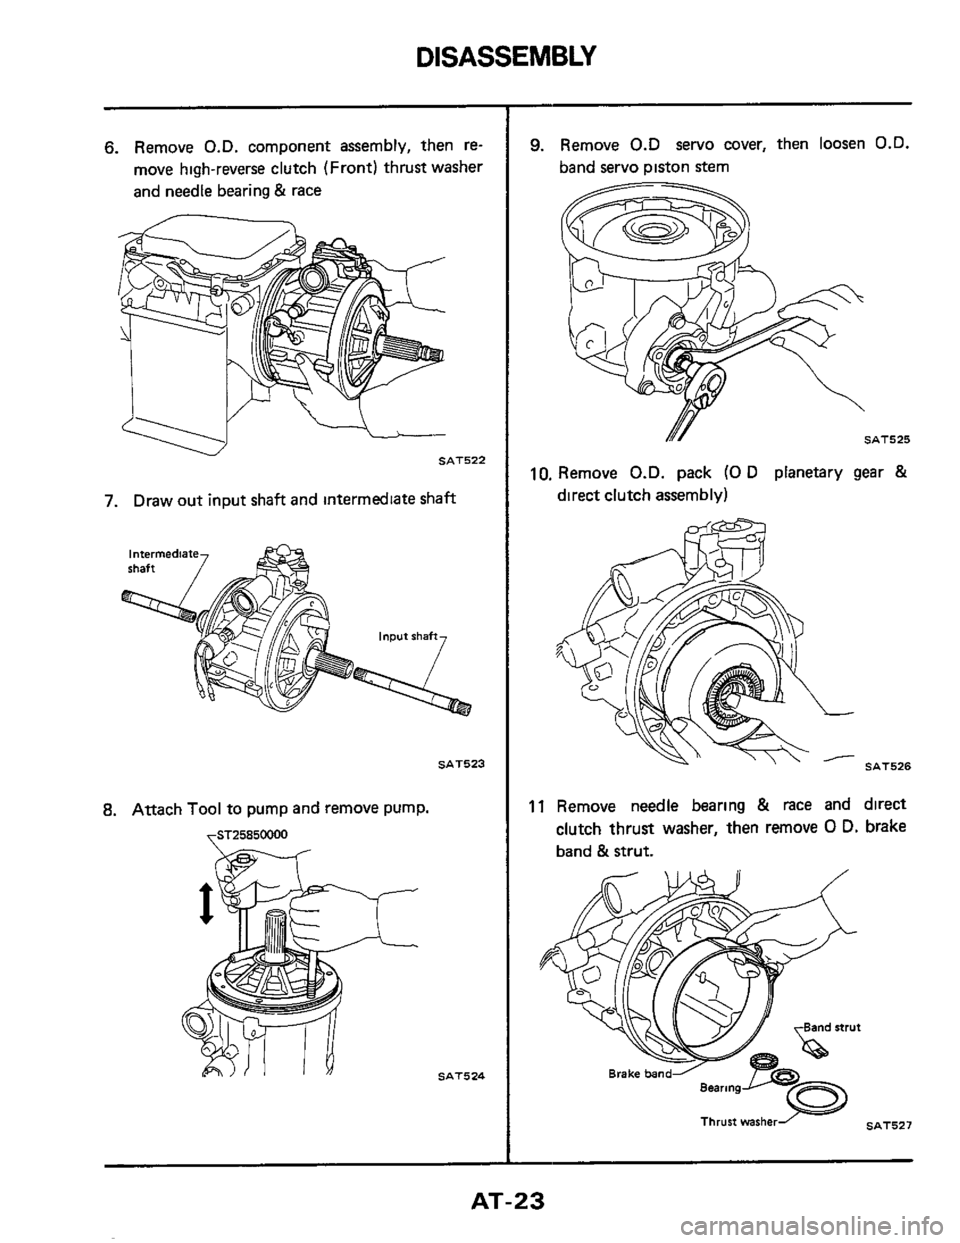 NISSAN 300ZX 1984 Z31 Automatic Transmission Workshop Manual DISASSEMBLY 
6. Remove O.D. component  assembly, then re- 
move  high-reverse  clutch (Front)  thrust washer 
and  needle bearing 
& race 
7. Draw  out input  shaft and intermedtate shaft 
8. Attach T